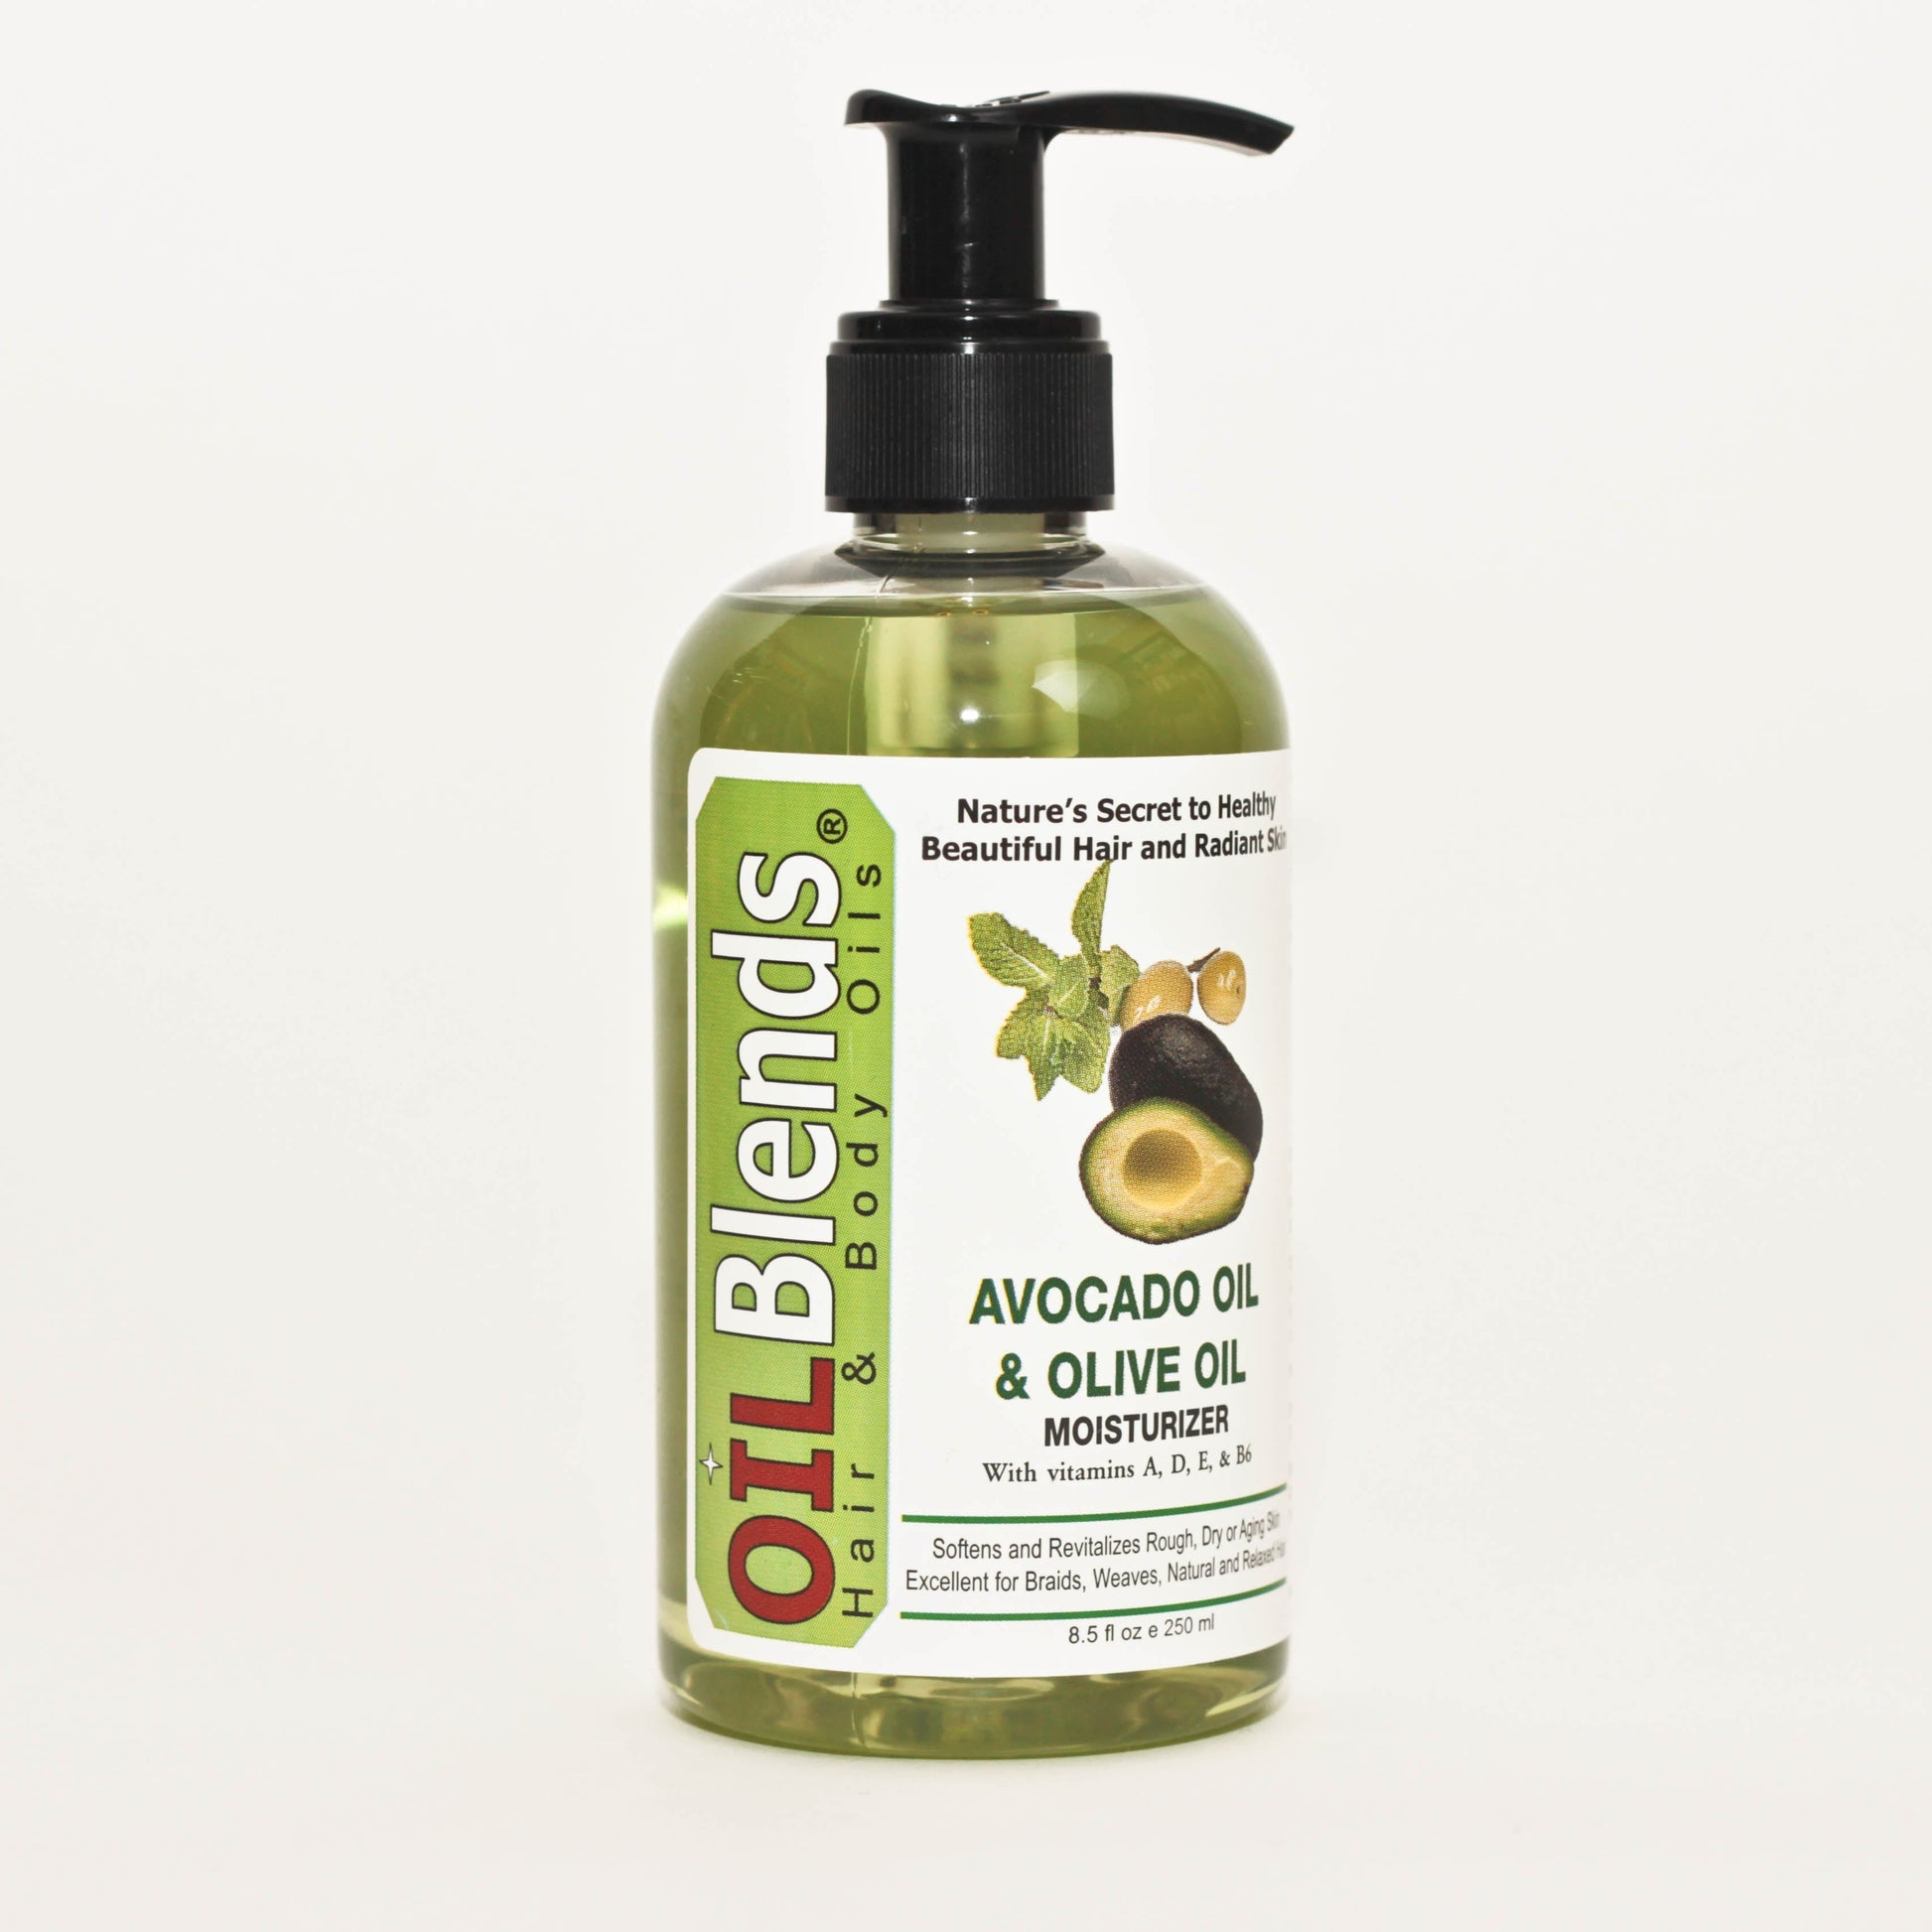 avocado and olive oil, oilblends, oil blends, body moisturizer, mature, sensitive or troubled skin, natural ingredients, hair oil, daily moisturizer, soft skin, healthy skin